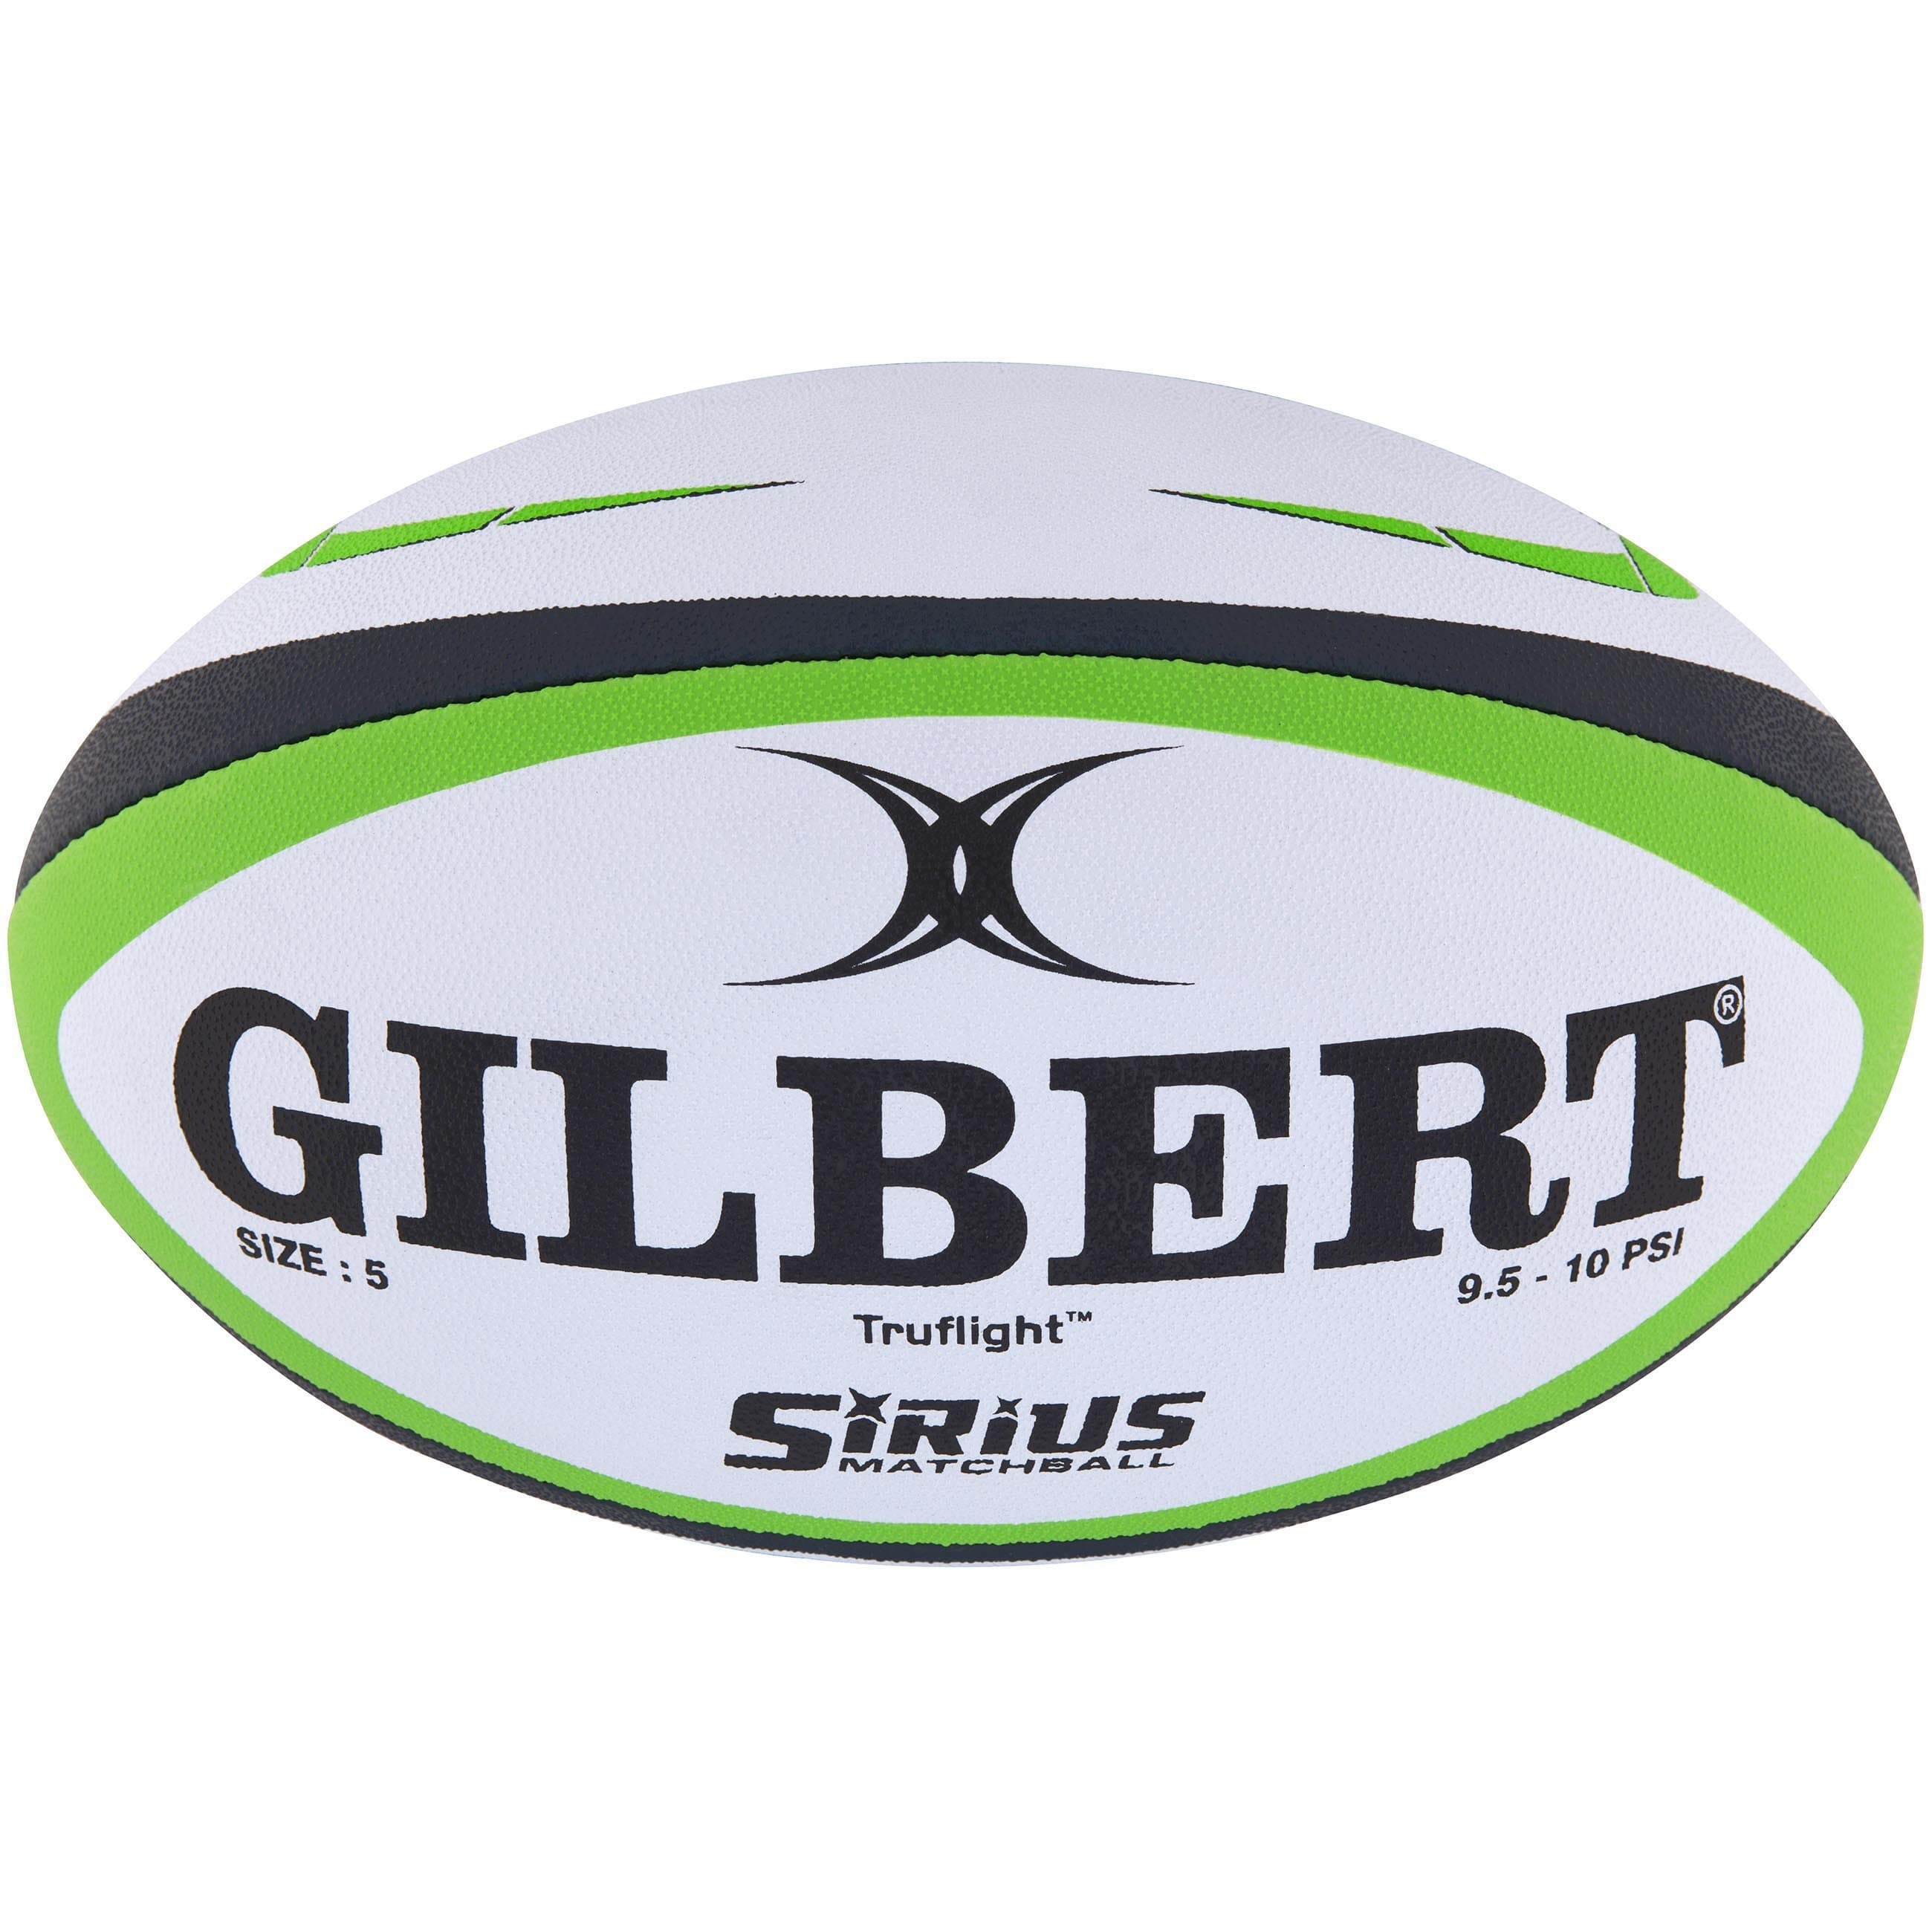 Ballon de rugby France Match Sirius - France - VI Nations - Nations